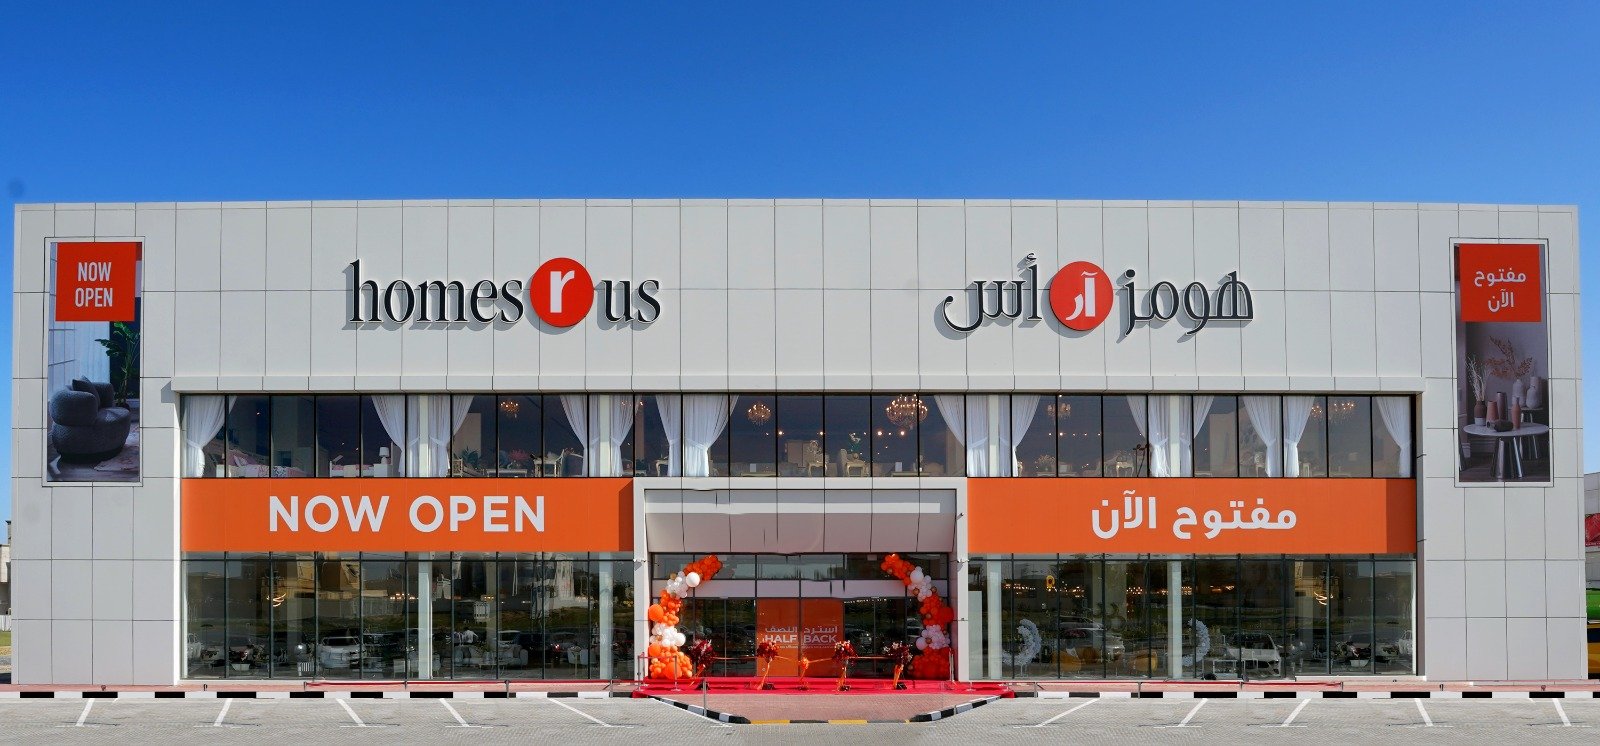 Homes r Us Expands Its Reach In The UAE With Its Newest Store In Ajman